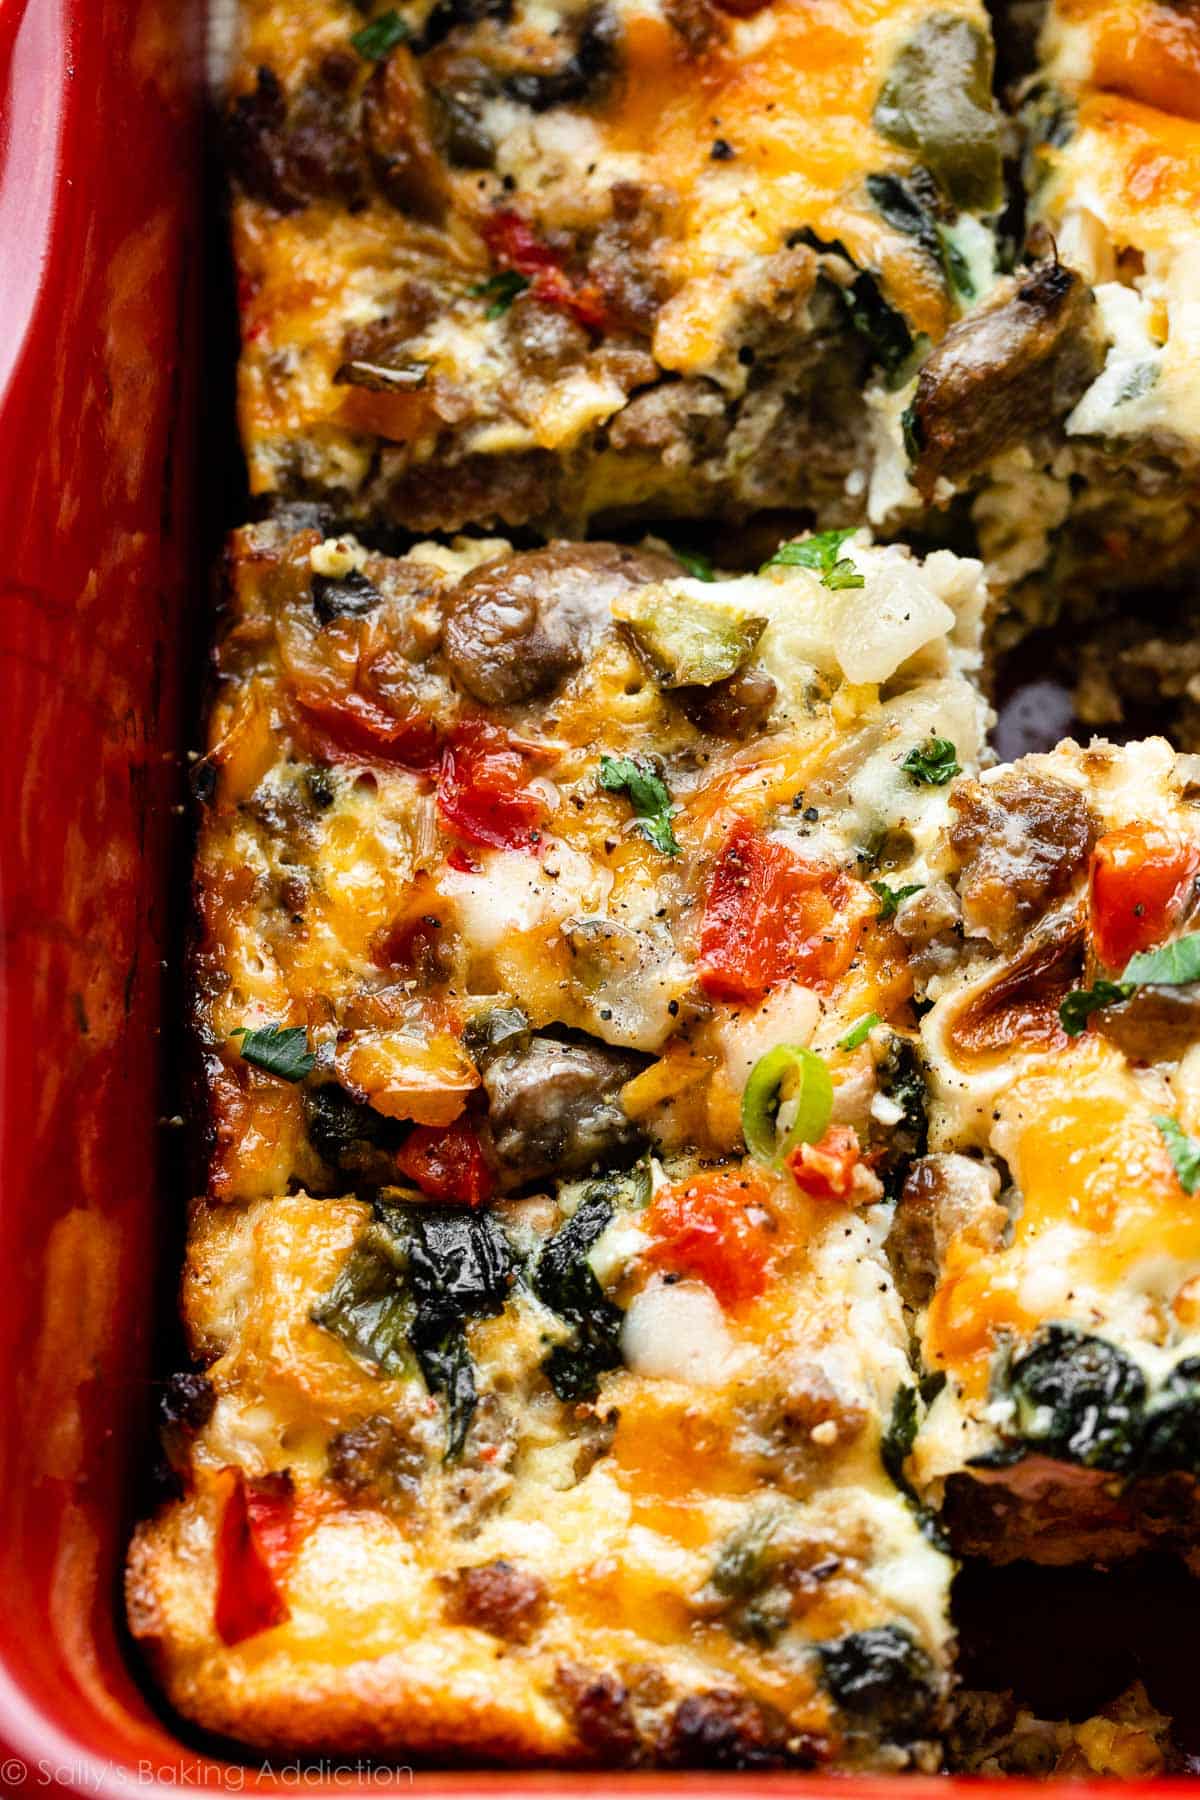 Spinach Casserole Recipe: Nutritious, Delicious, and Simple to Make